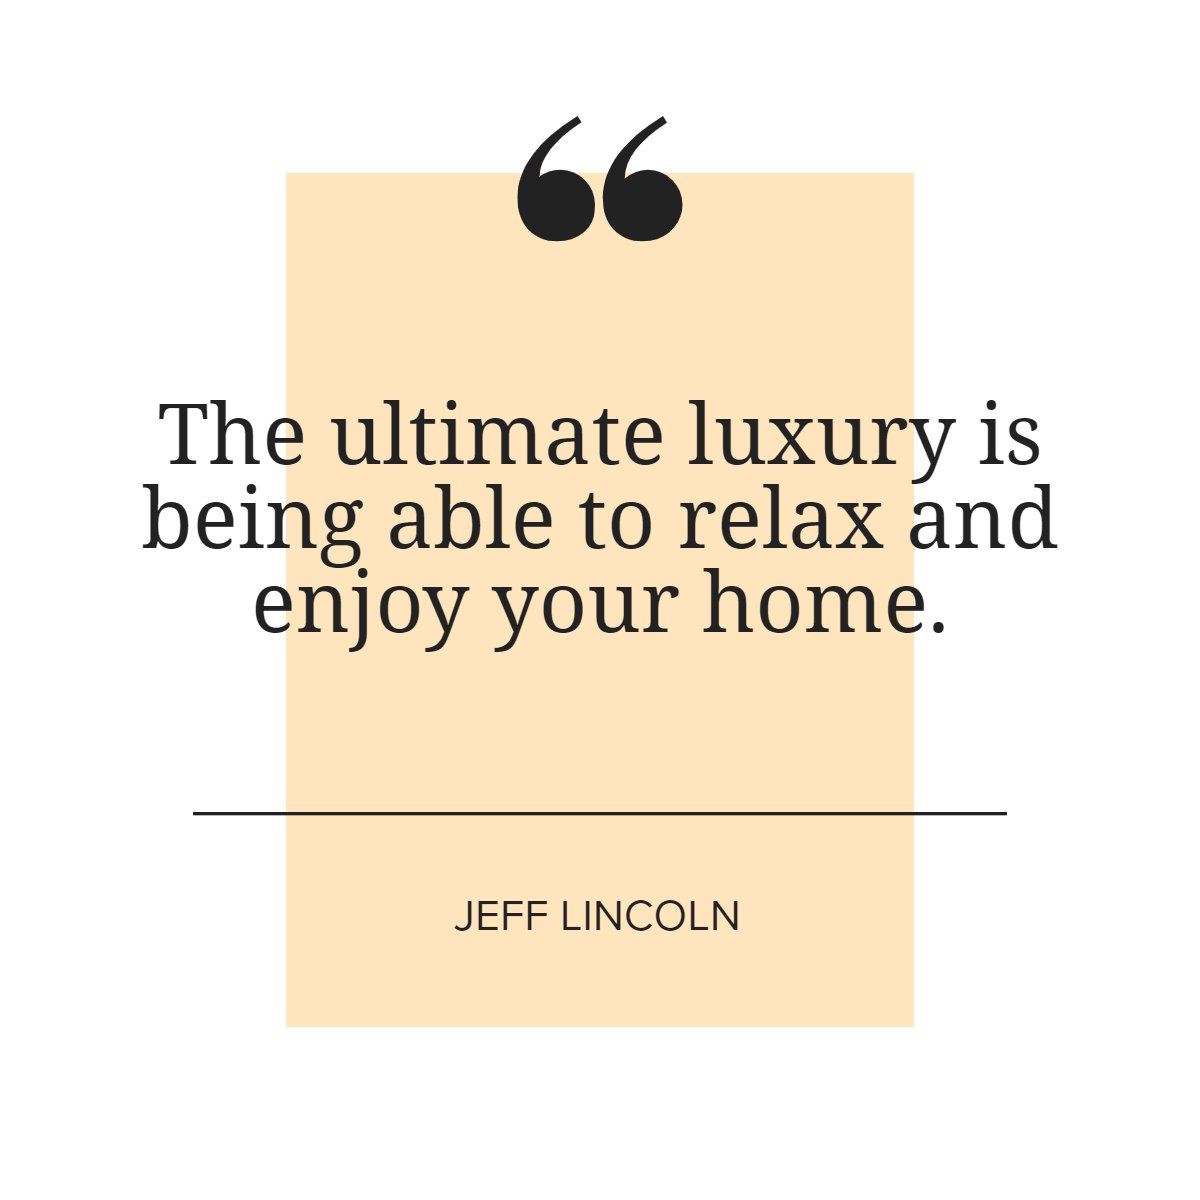 'The ultimate luxury is being able to relax and enjoy your home'
― Jeff Lincoln 📖

#luxurylifestyle  #luxury  #home  #lifestyle  #jefflincoln  #quote  #quoteoftheday
#callniecie